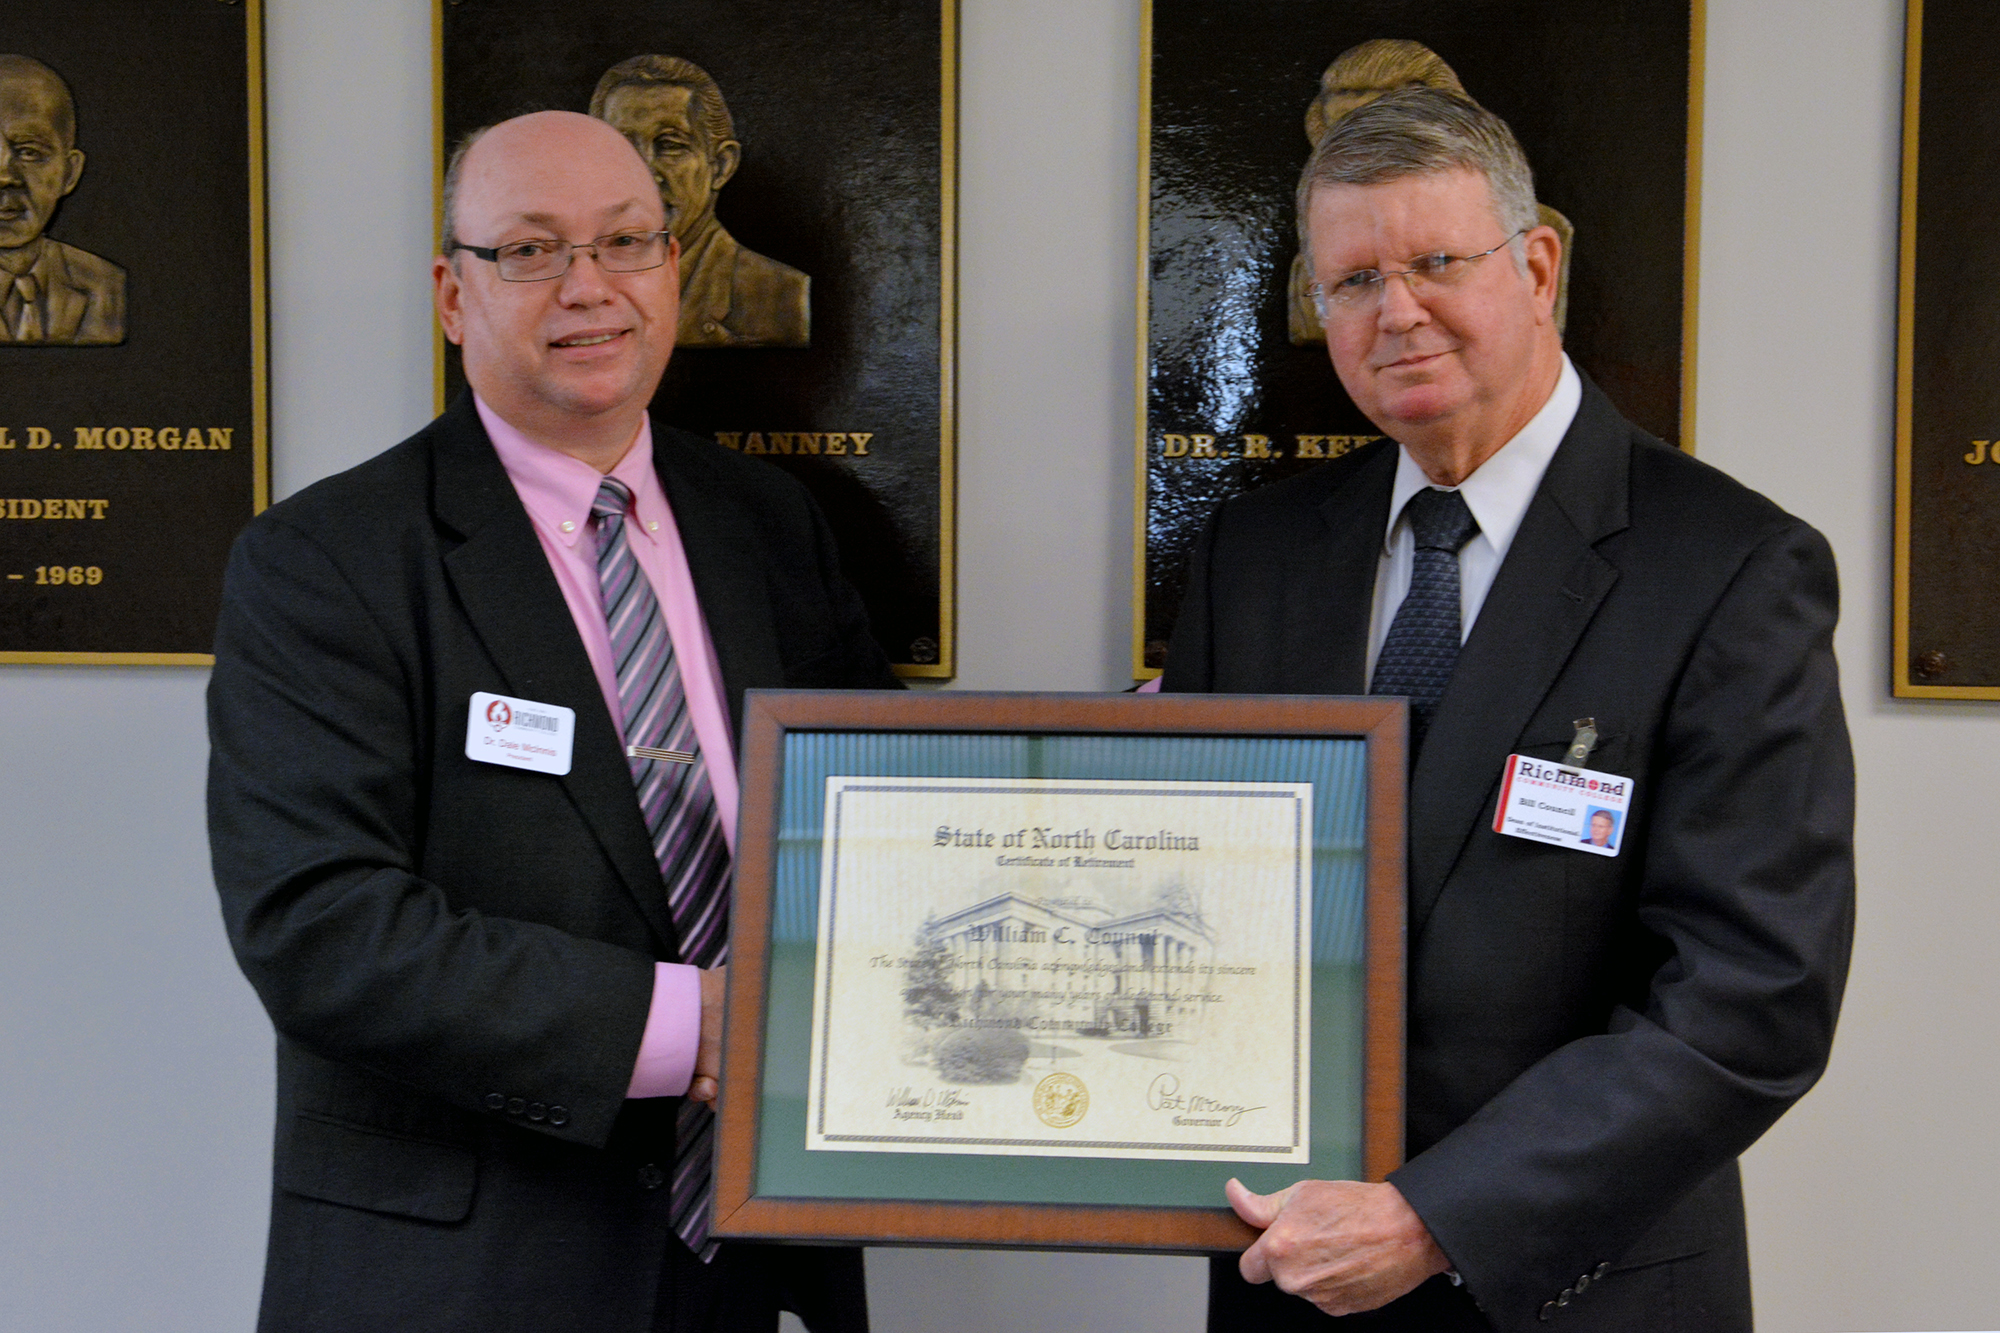 RCC President Dr. Dale McInnis (left) presents Bill Council with a plaque commemorating his retirement from the College. Council served as Dean of Advancement and later as Dean of Institutional Effectiveness and Accountability during his tenure at RCC. Council joined RCC after a distinguished career in the U.S. Army where he retired as a lieutenant colonel.